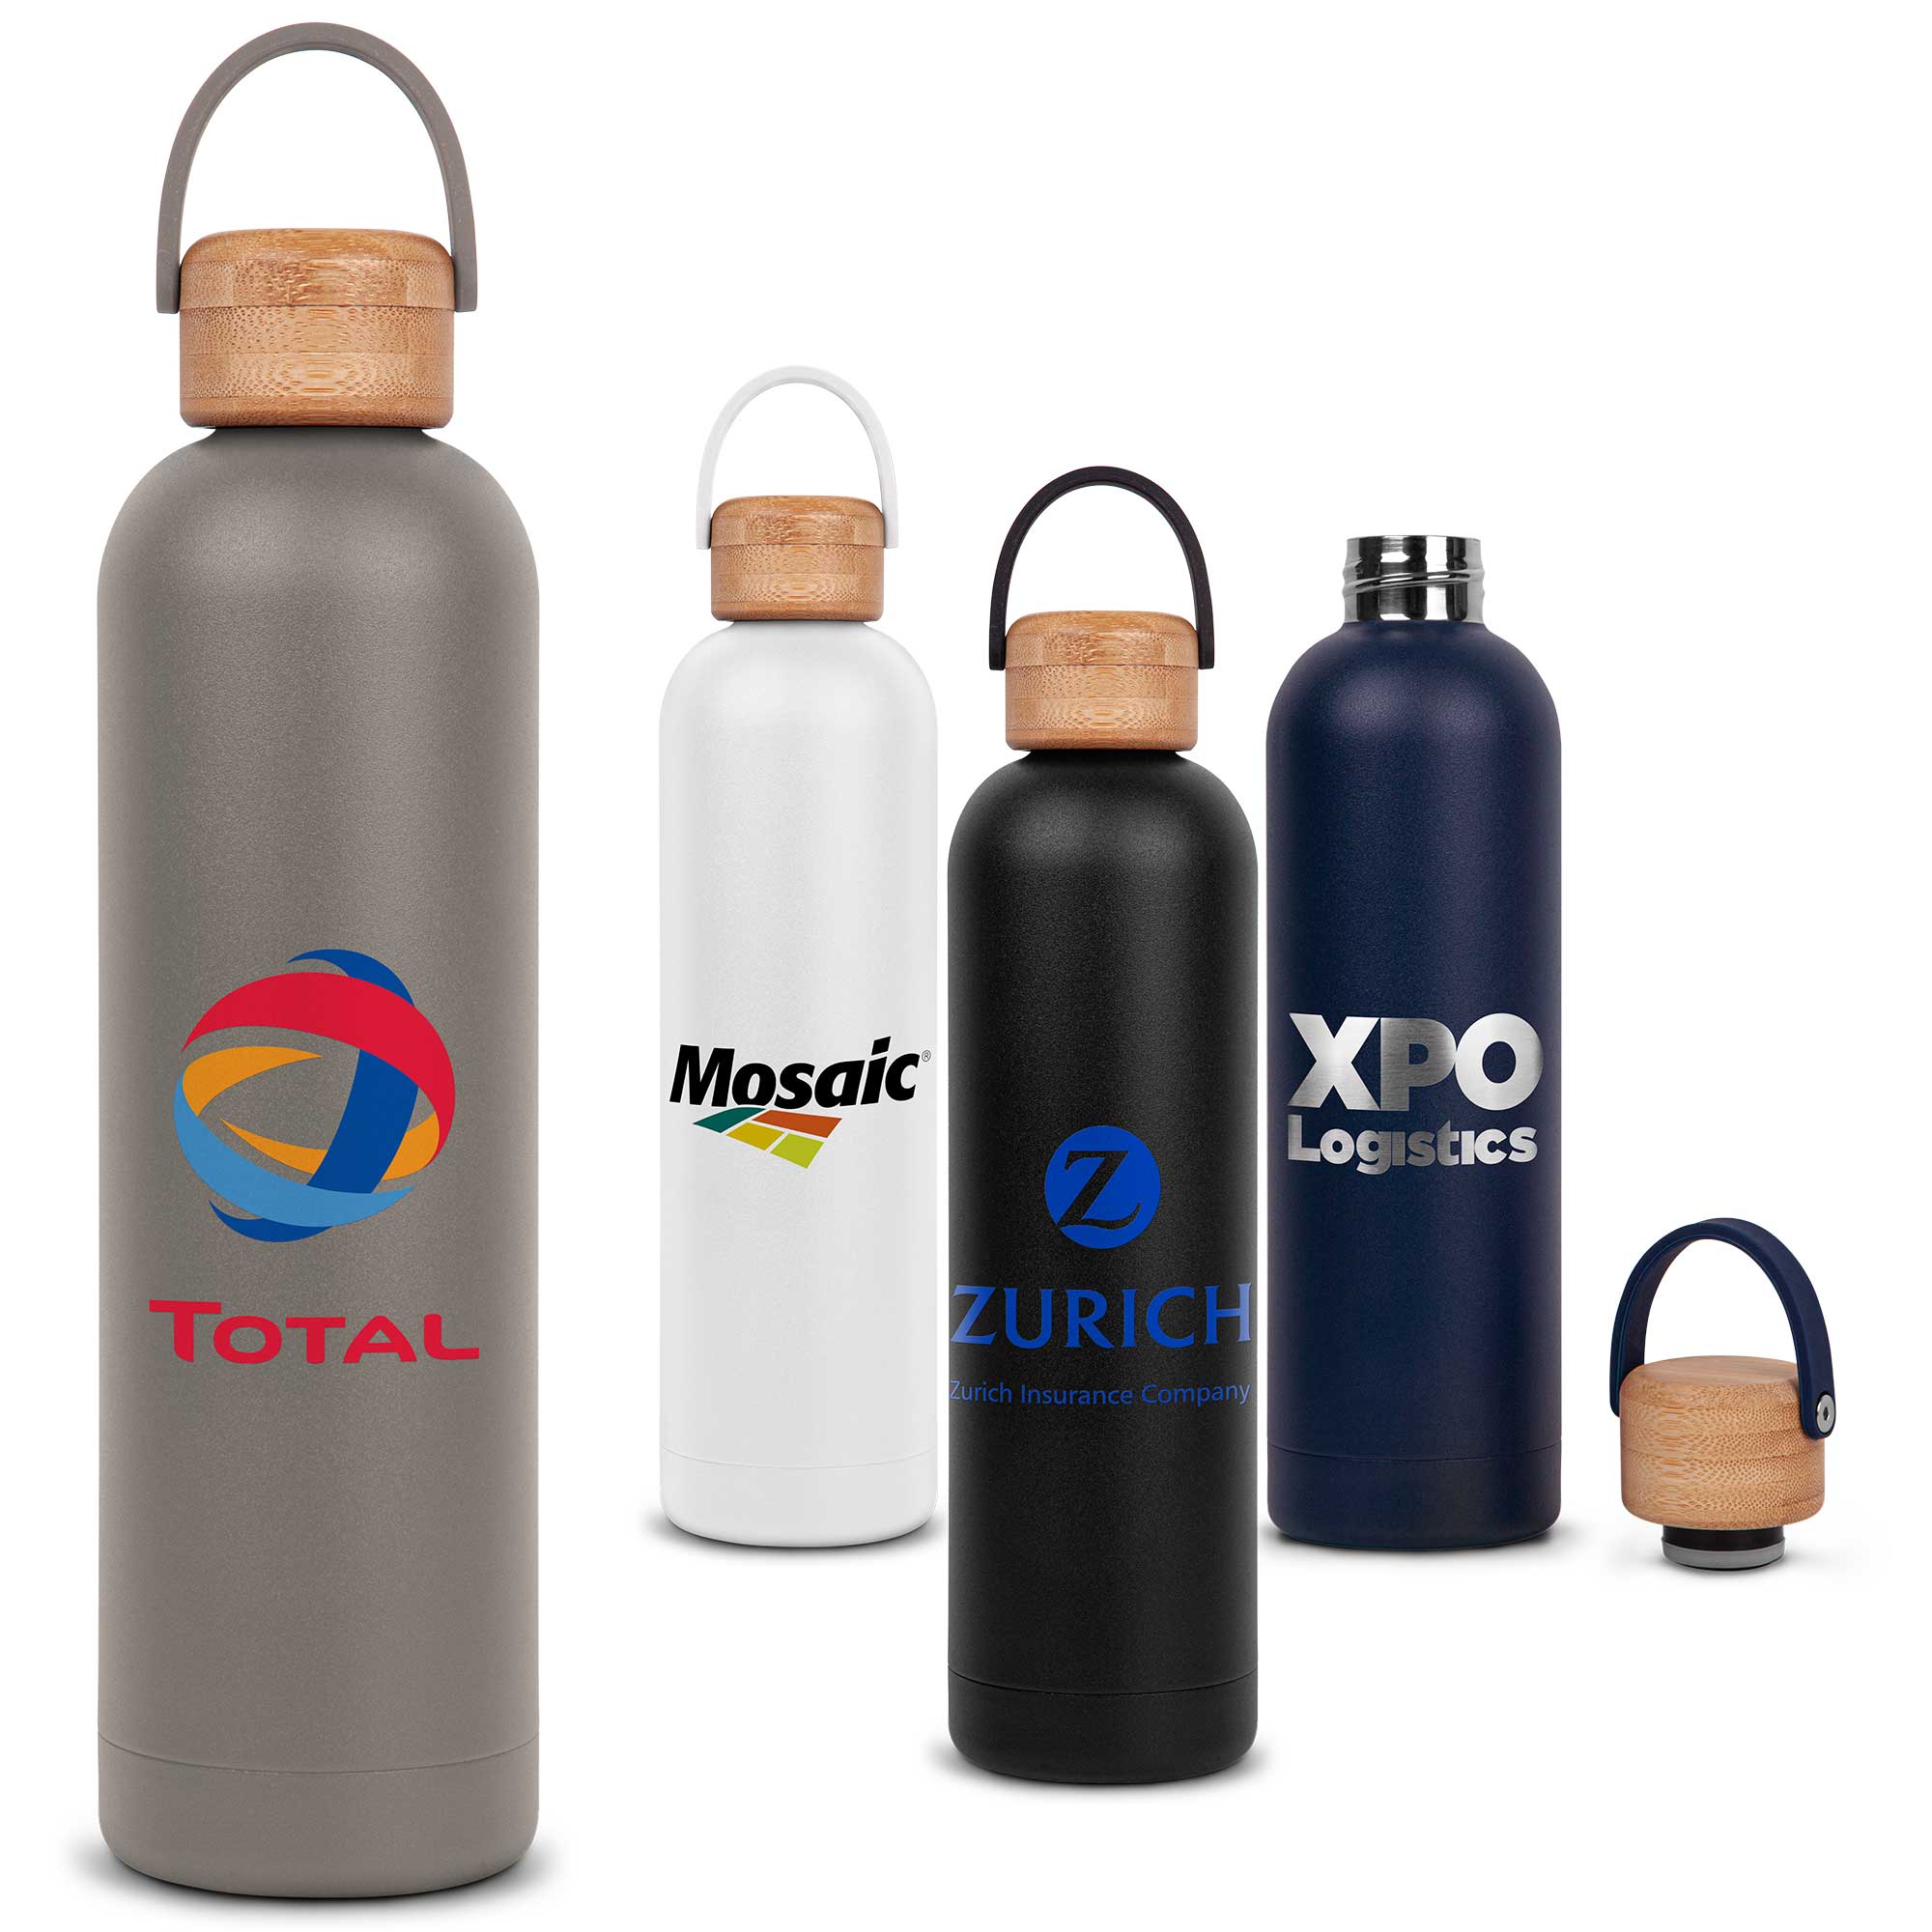 Allegra Bottle with Bamboo Lid 33oz. - Stylish, minimalist water bottle made of vacuum-insulated stainless steel to keep your drinks hot for 12 hours and cold for 24 hours. Features a twist-on bamboo lid with silicone strap and durable powder coating. Hand wash only, do not microwave.